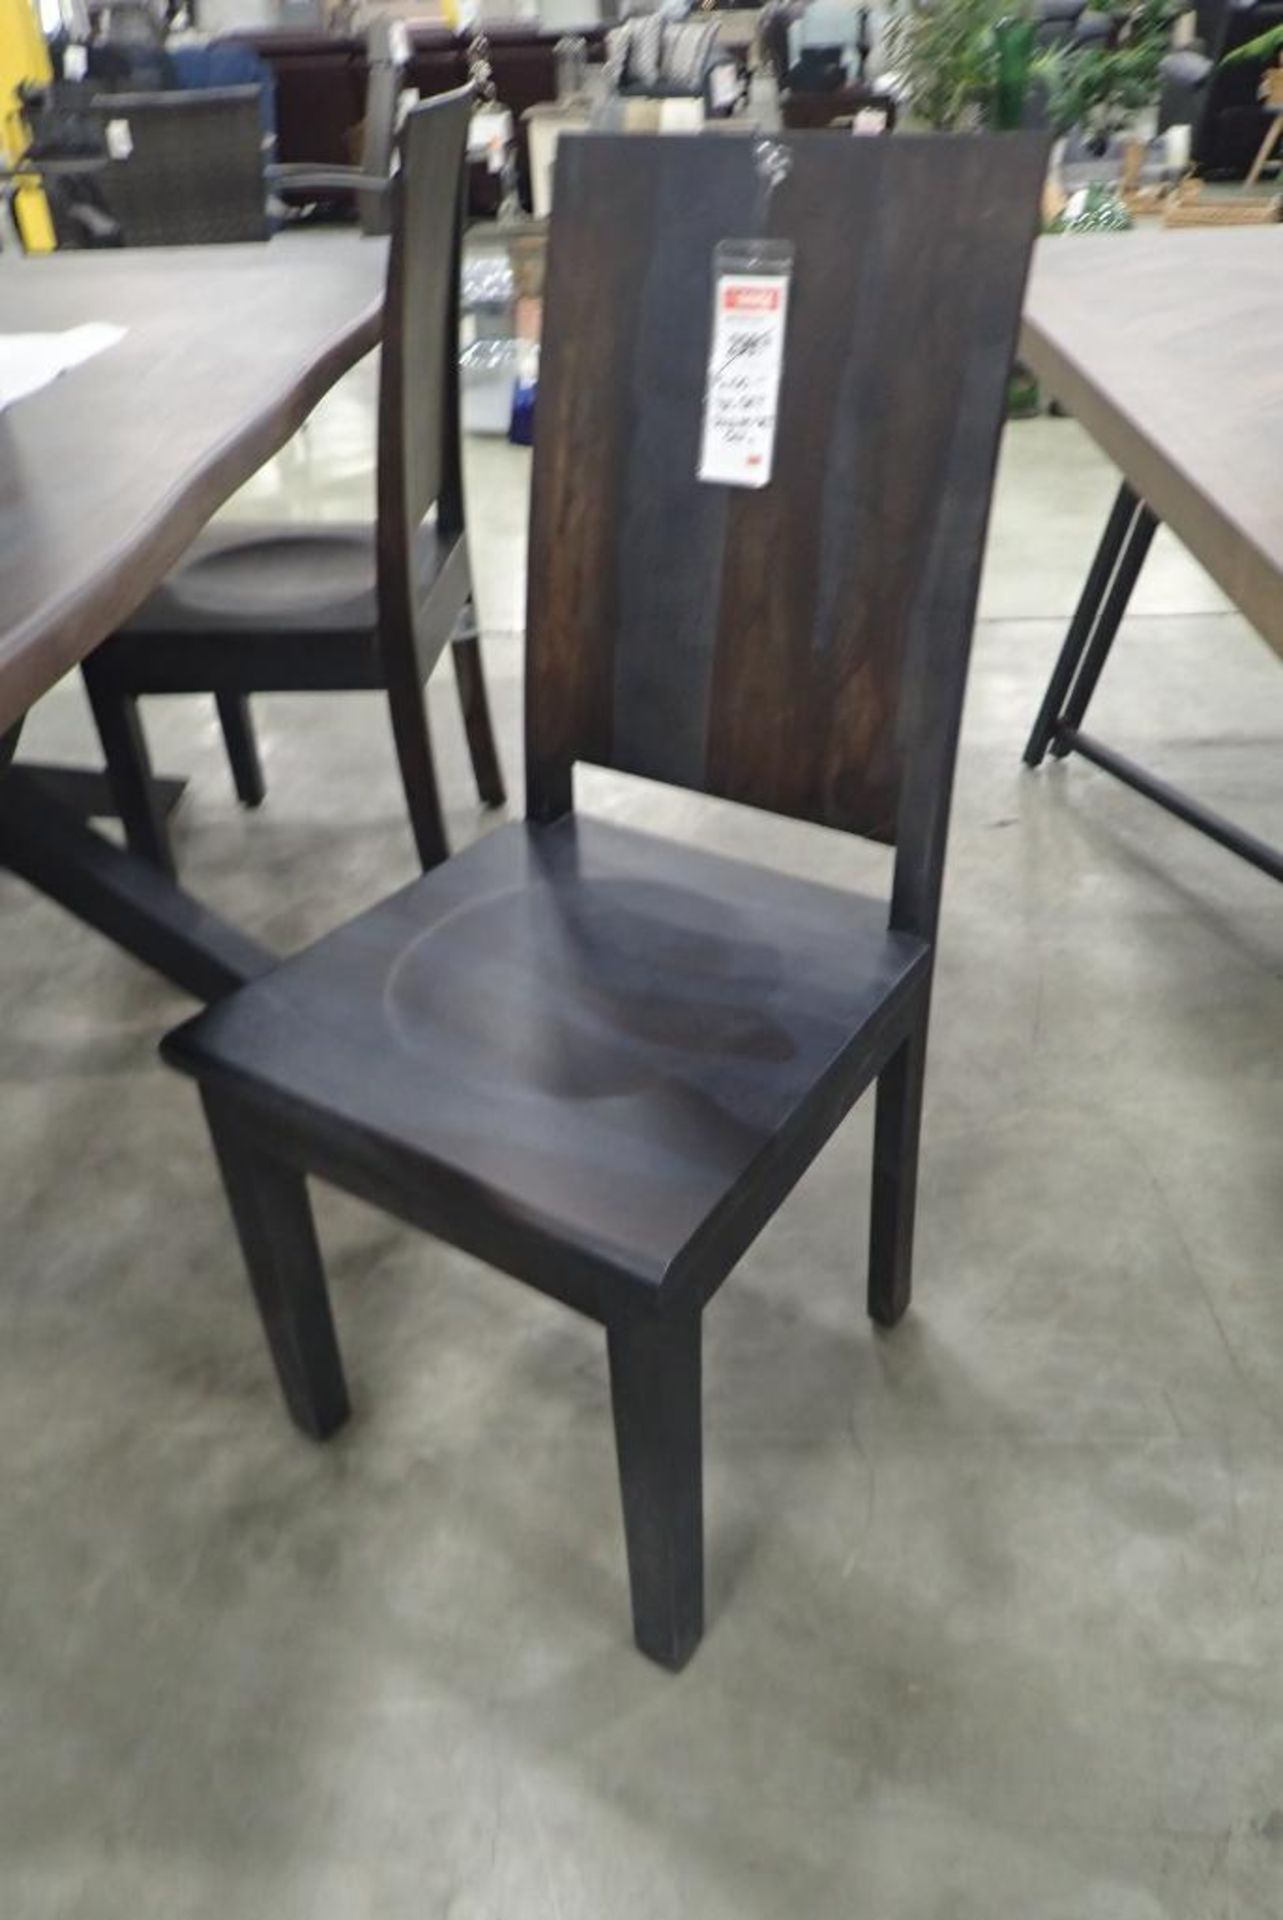 Wood Top 72"x39" Dining Table w/ (2) 12" Pull-Out Leaves, 2 Dining Chairs and 70" Bench. - Image 5 of 5